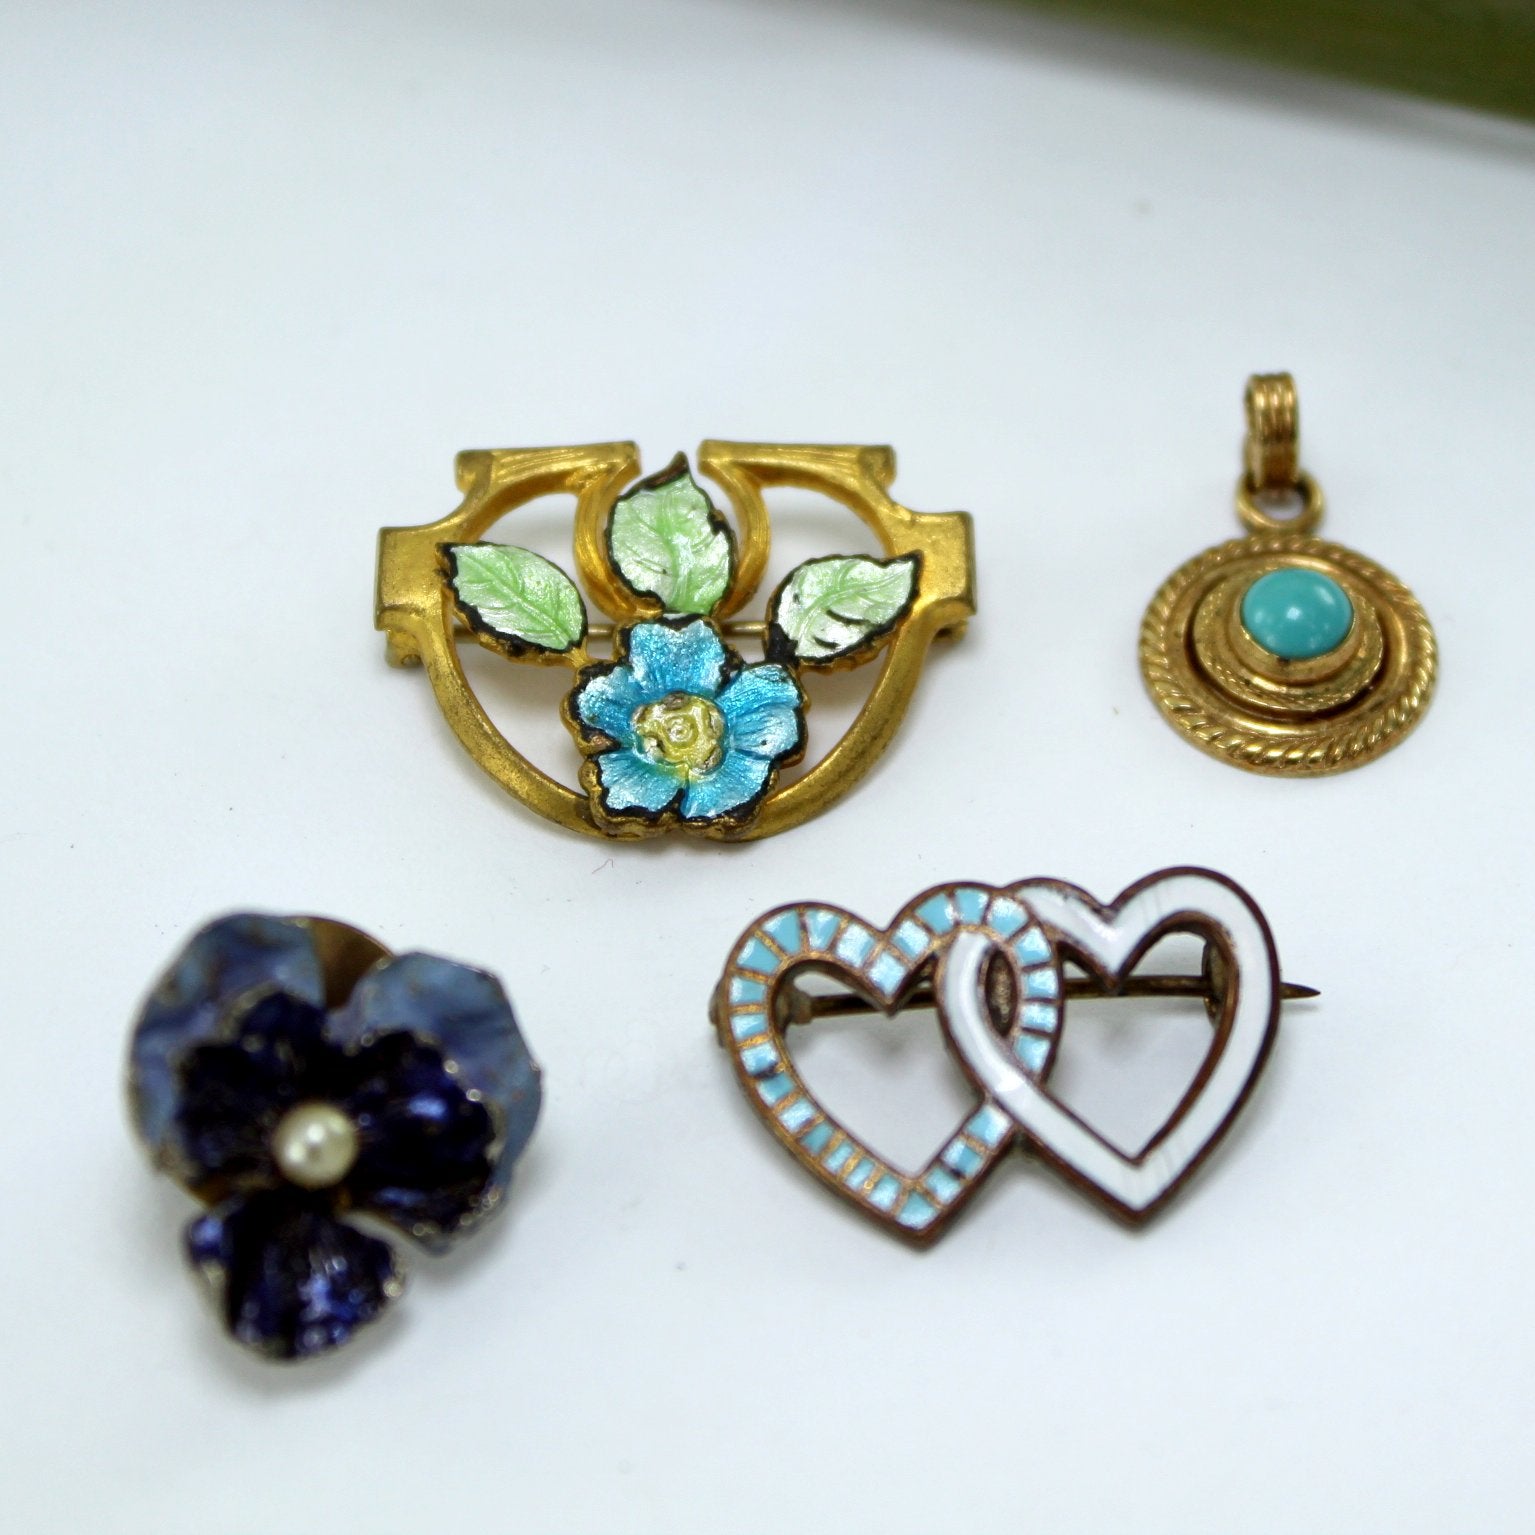 Collection Mid Century Pins Button Pendant Floral Enamel Hearts Pansy Wells 14K GF closeup of items